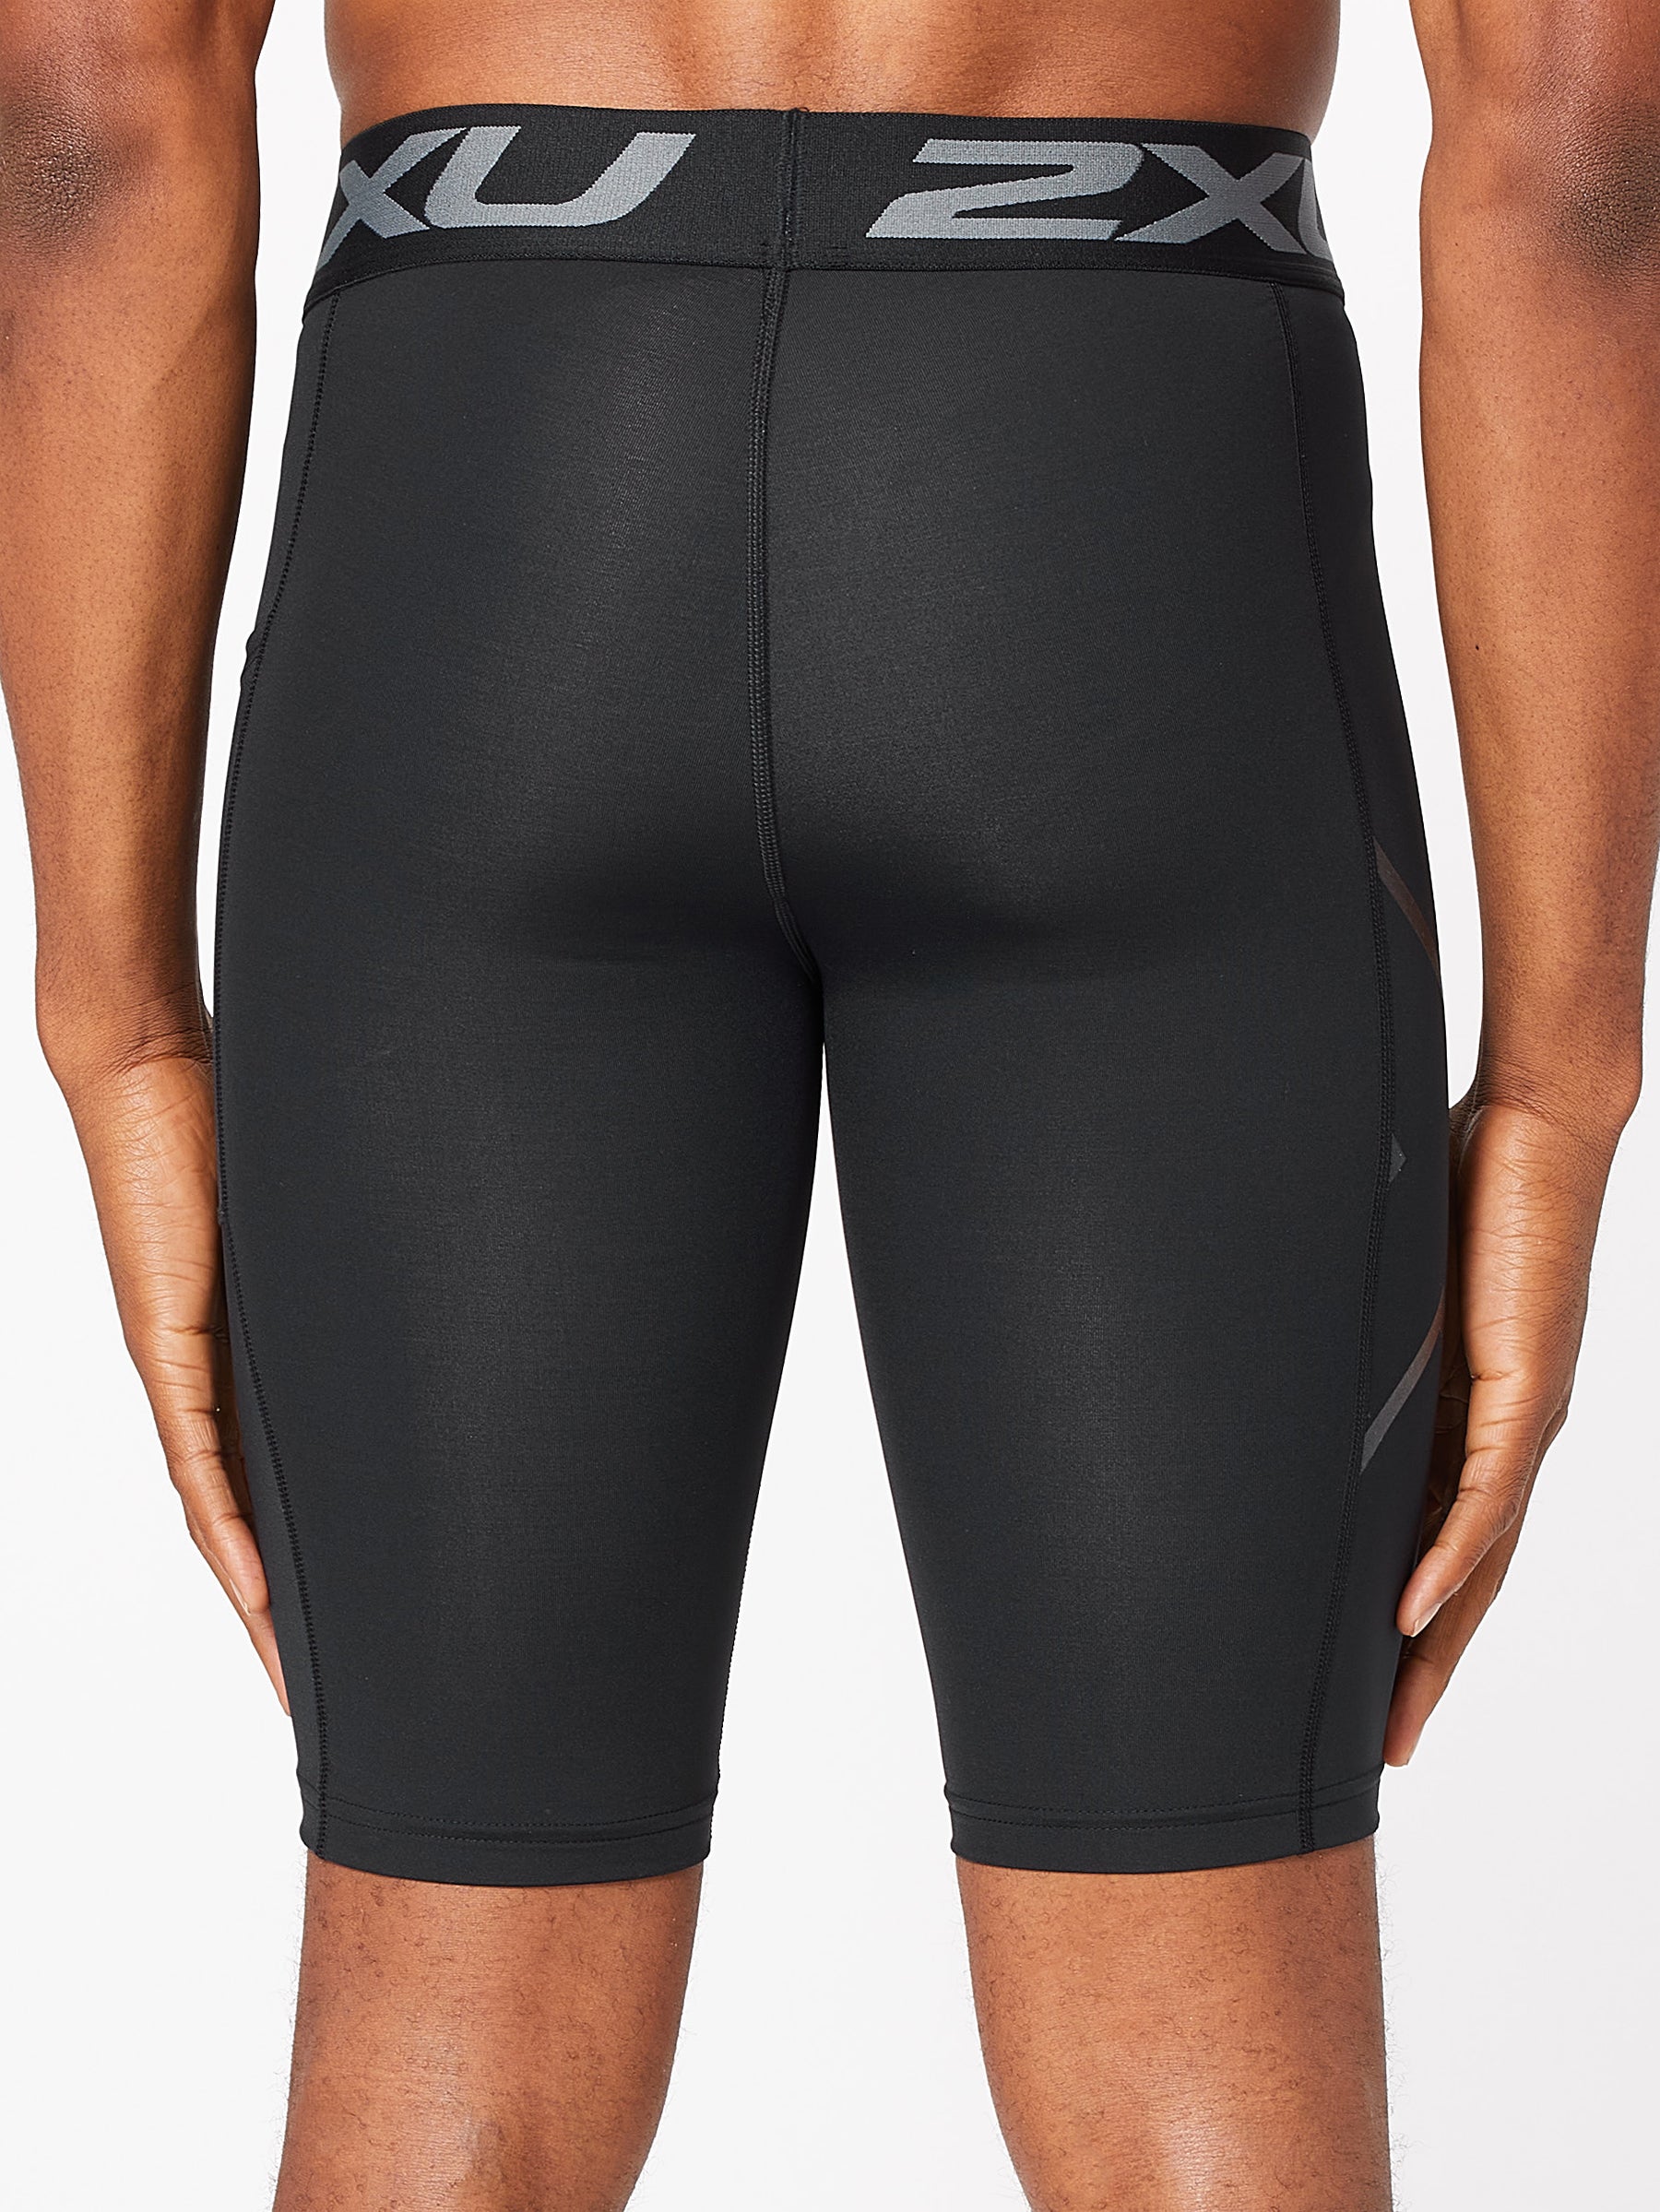 Mens Running Shorts With Brief Black Details about   2XU GHST 2.5 Inch 